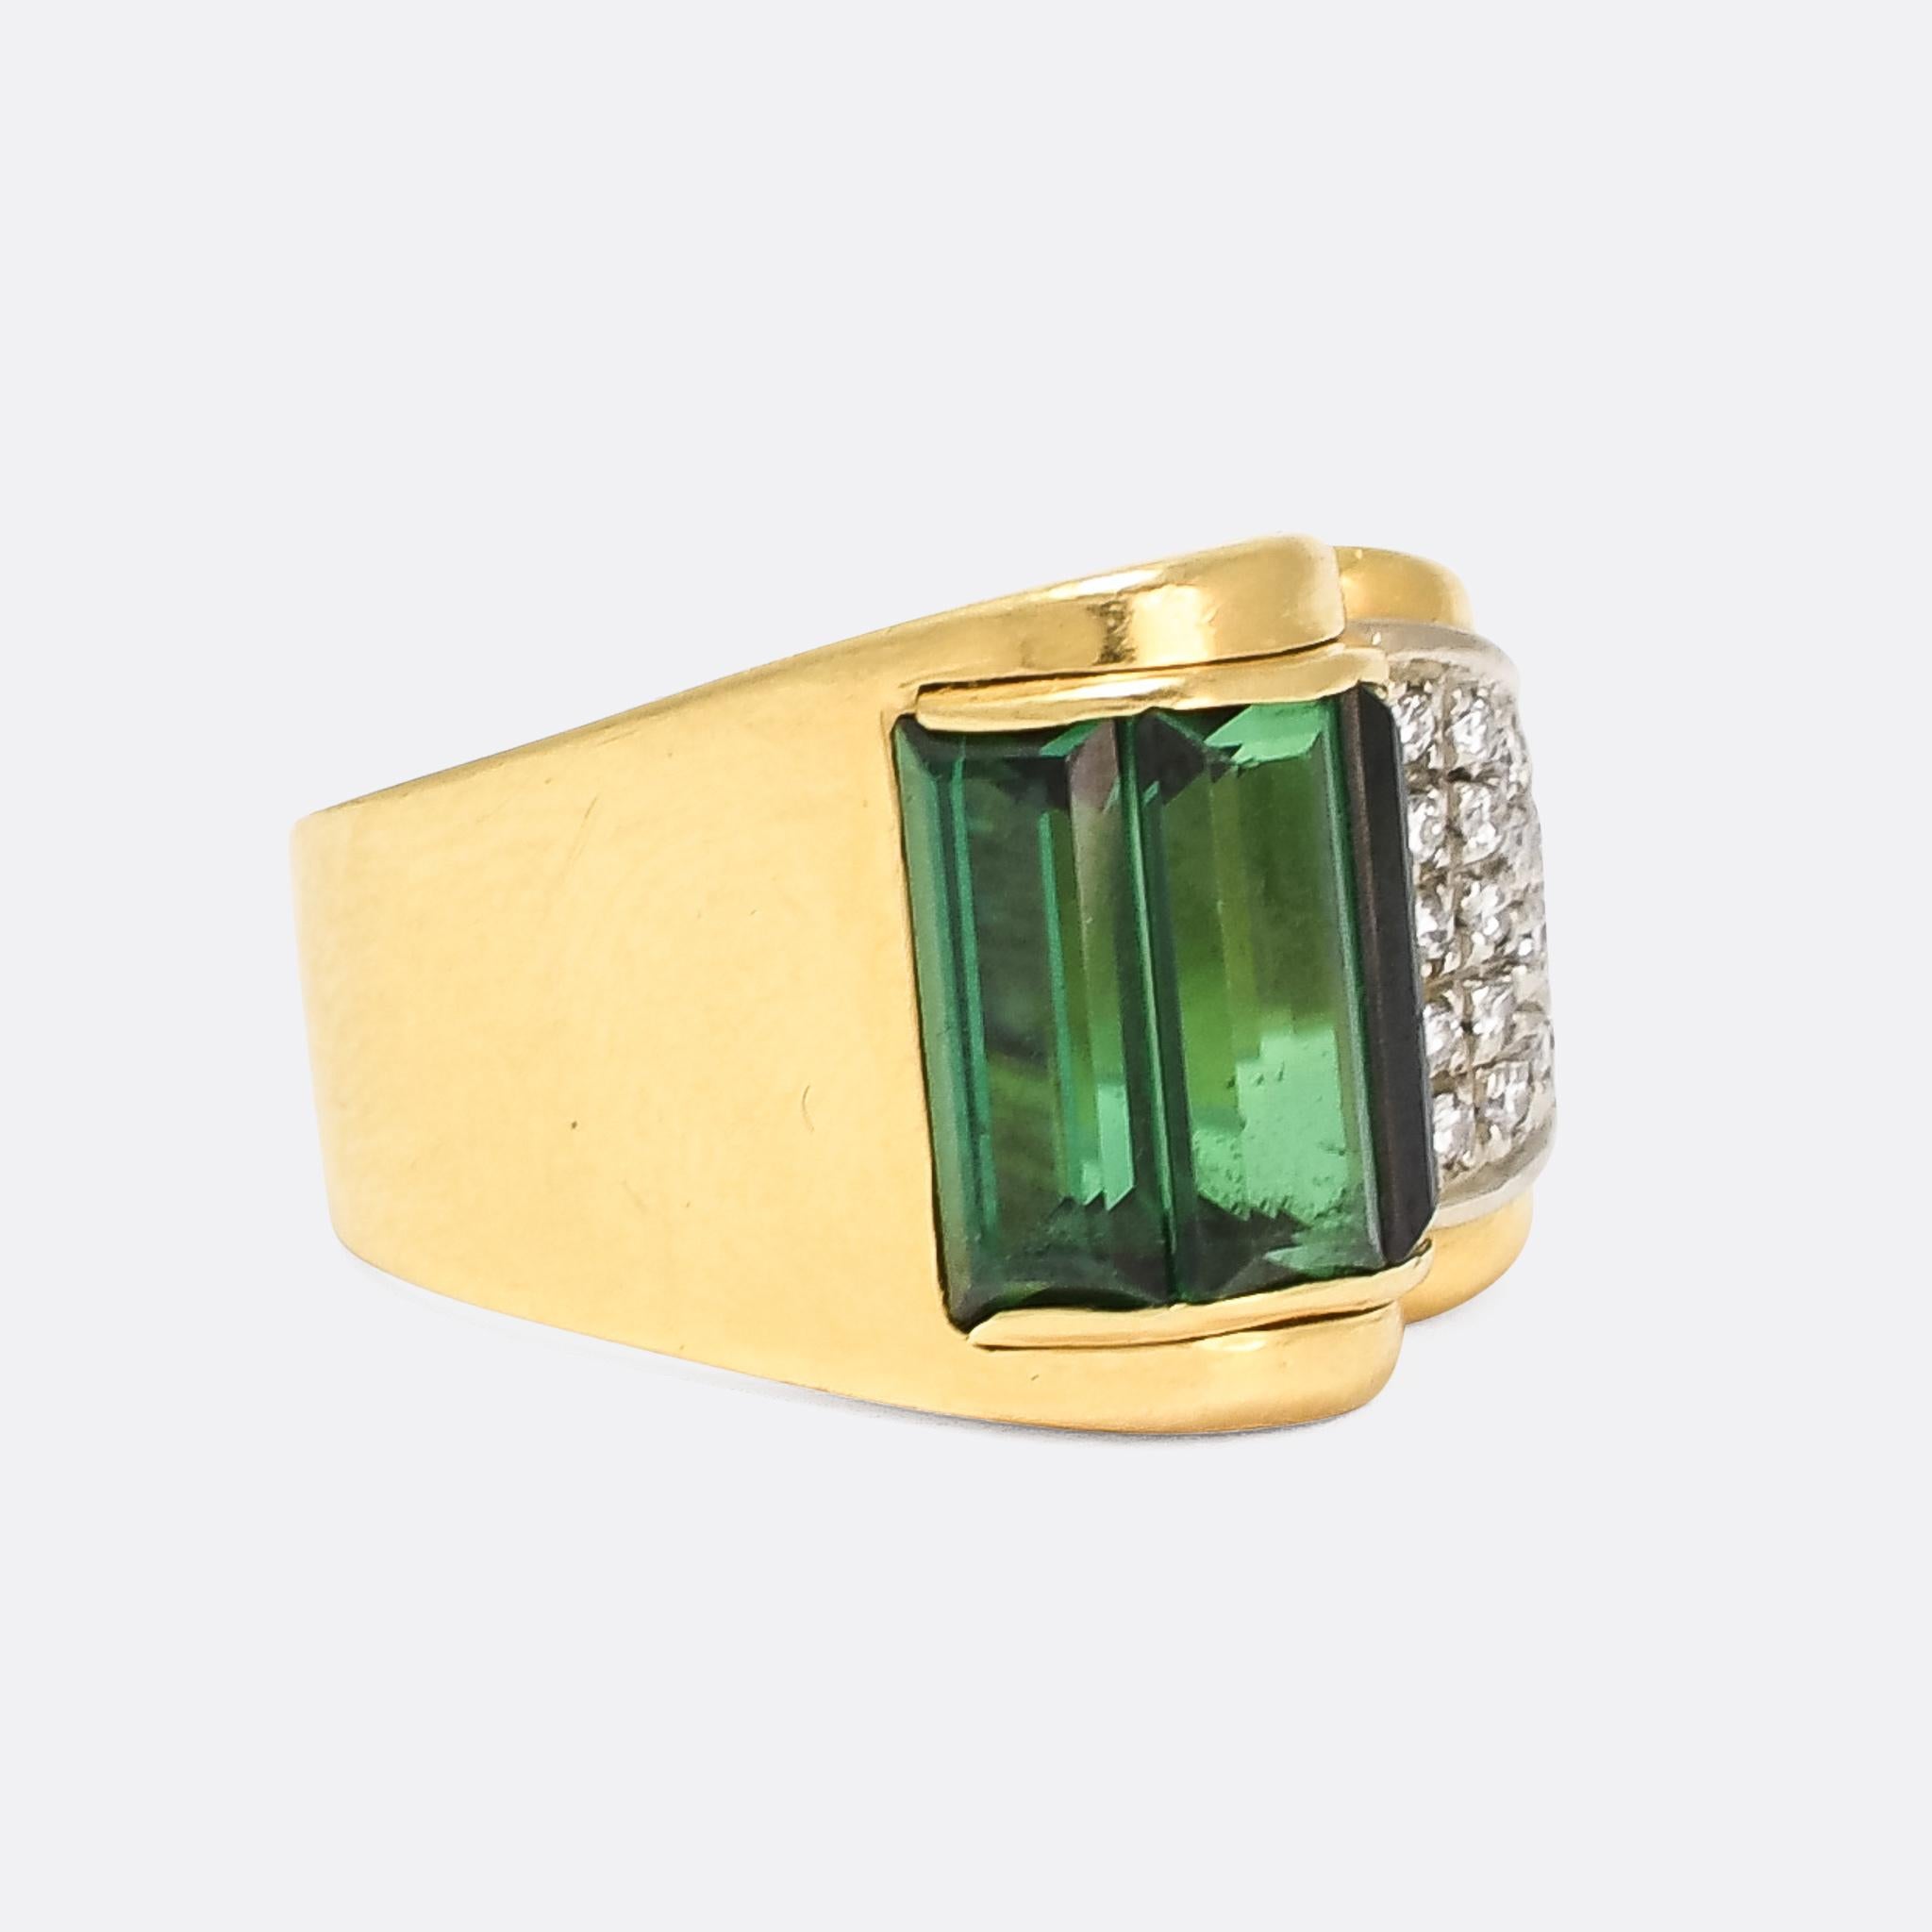 A stunning Art Deco cocktail ring set with green tourmaline and diamonds. The three long tourmaline baguettes are set in a semicircular bezel that curves around to meet the pavé diamond section - quintessentially Deco in design and bold use of